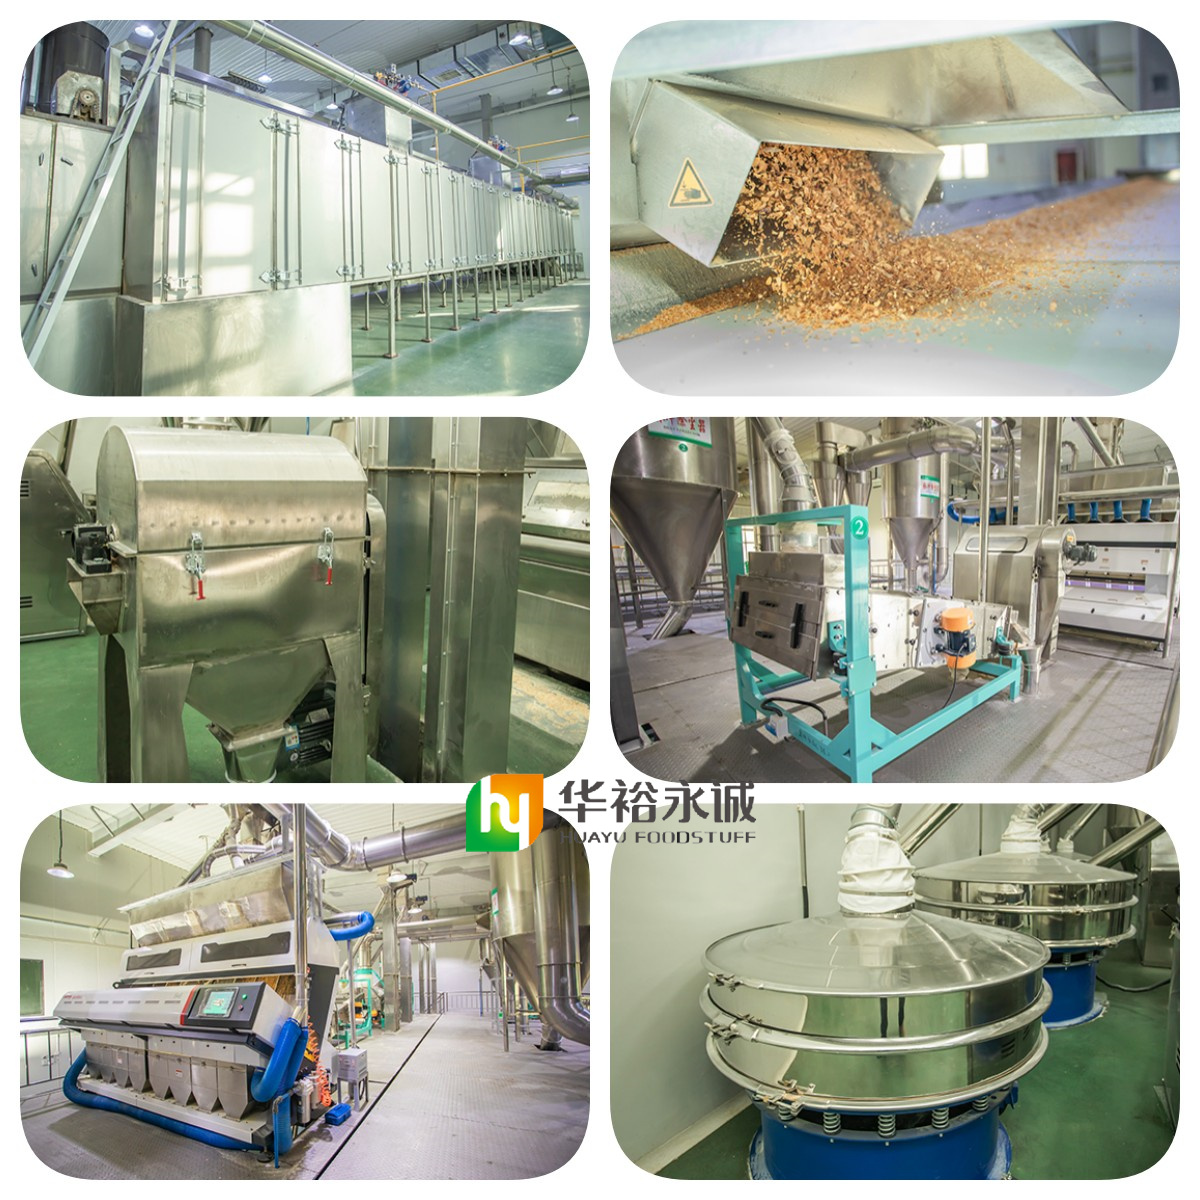 Pure Onion Powder for Food Processing Customized Packaging